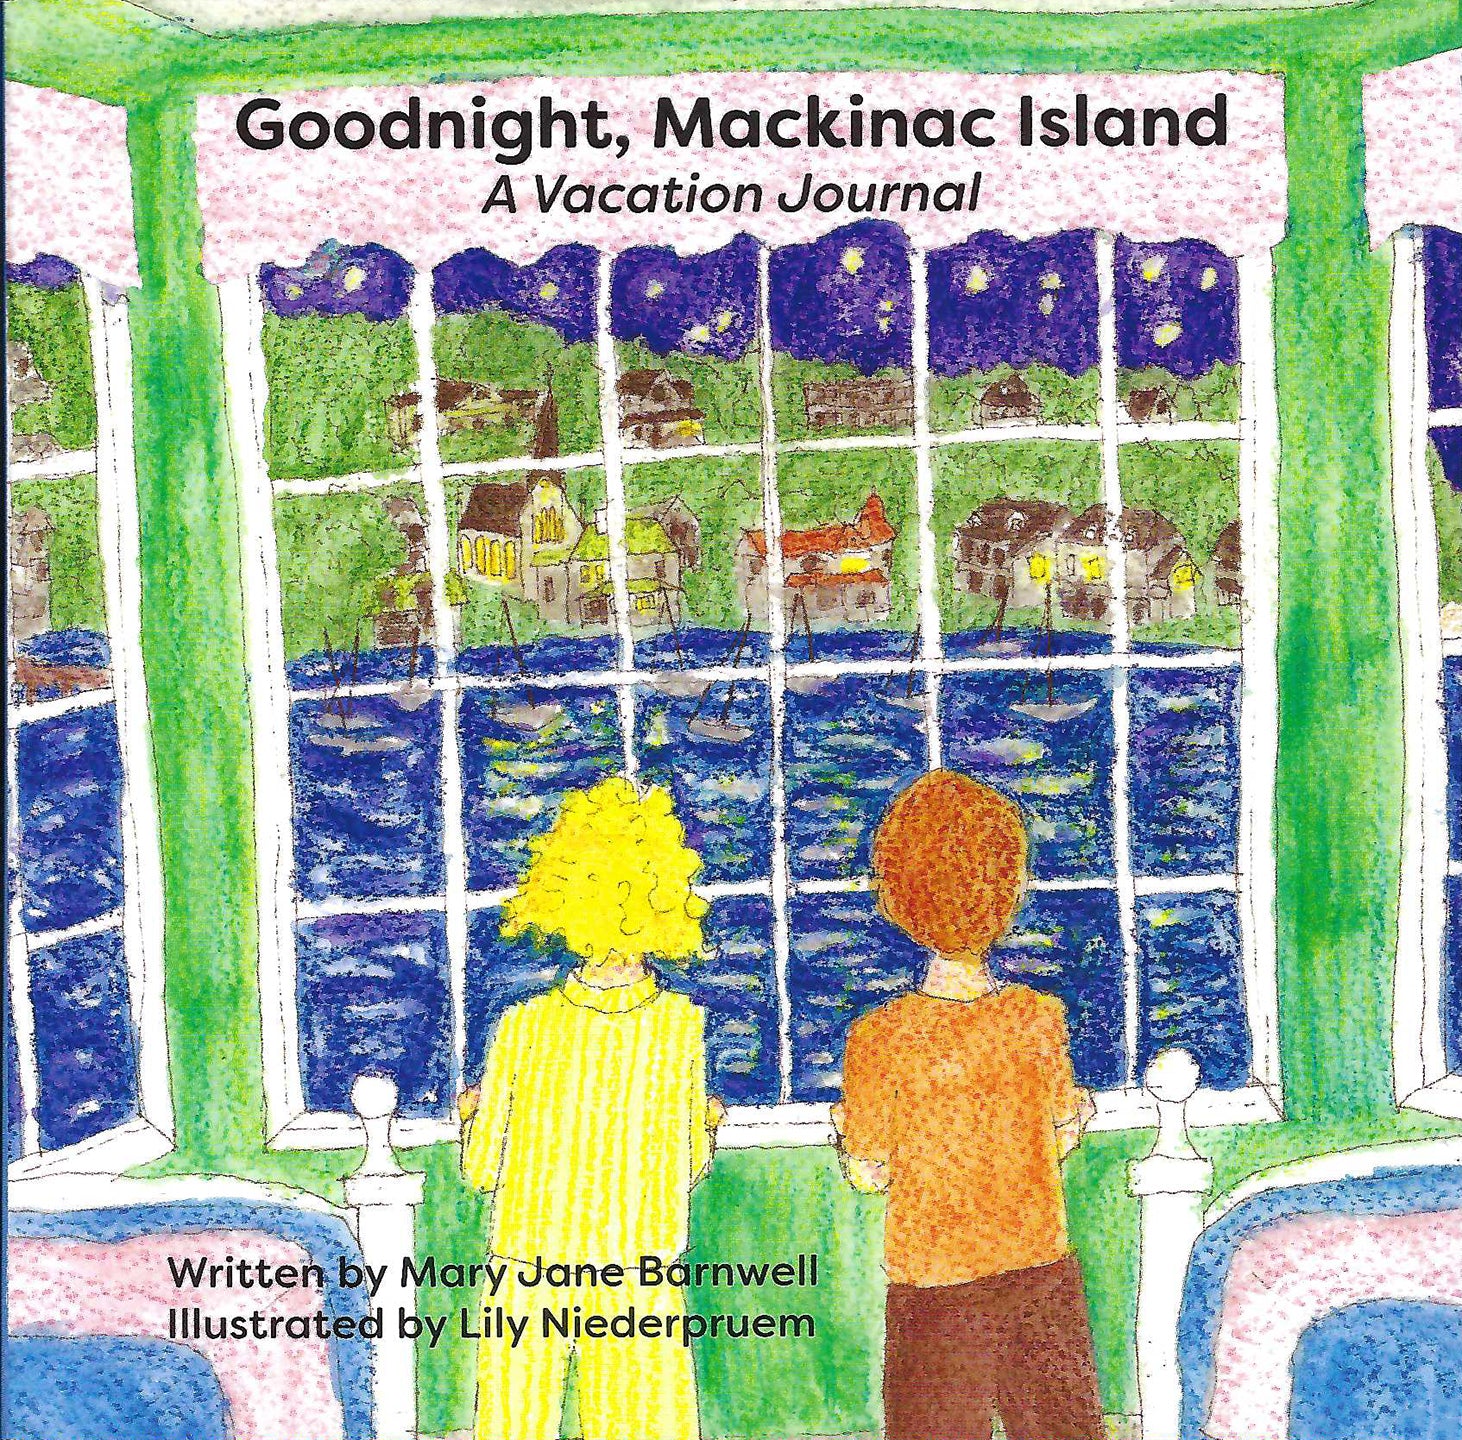 Goodnight, Mackinac Island children's board book by Mary Jane Barnwell, a resident of Mackinac Island, Mich.  Illustrated by Lily Niederpruem.